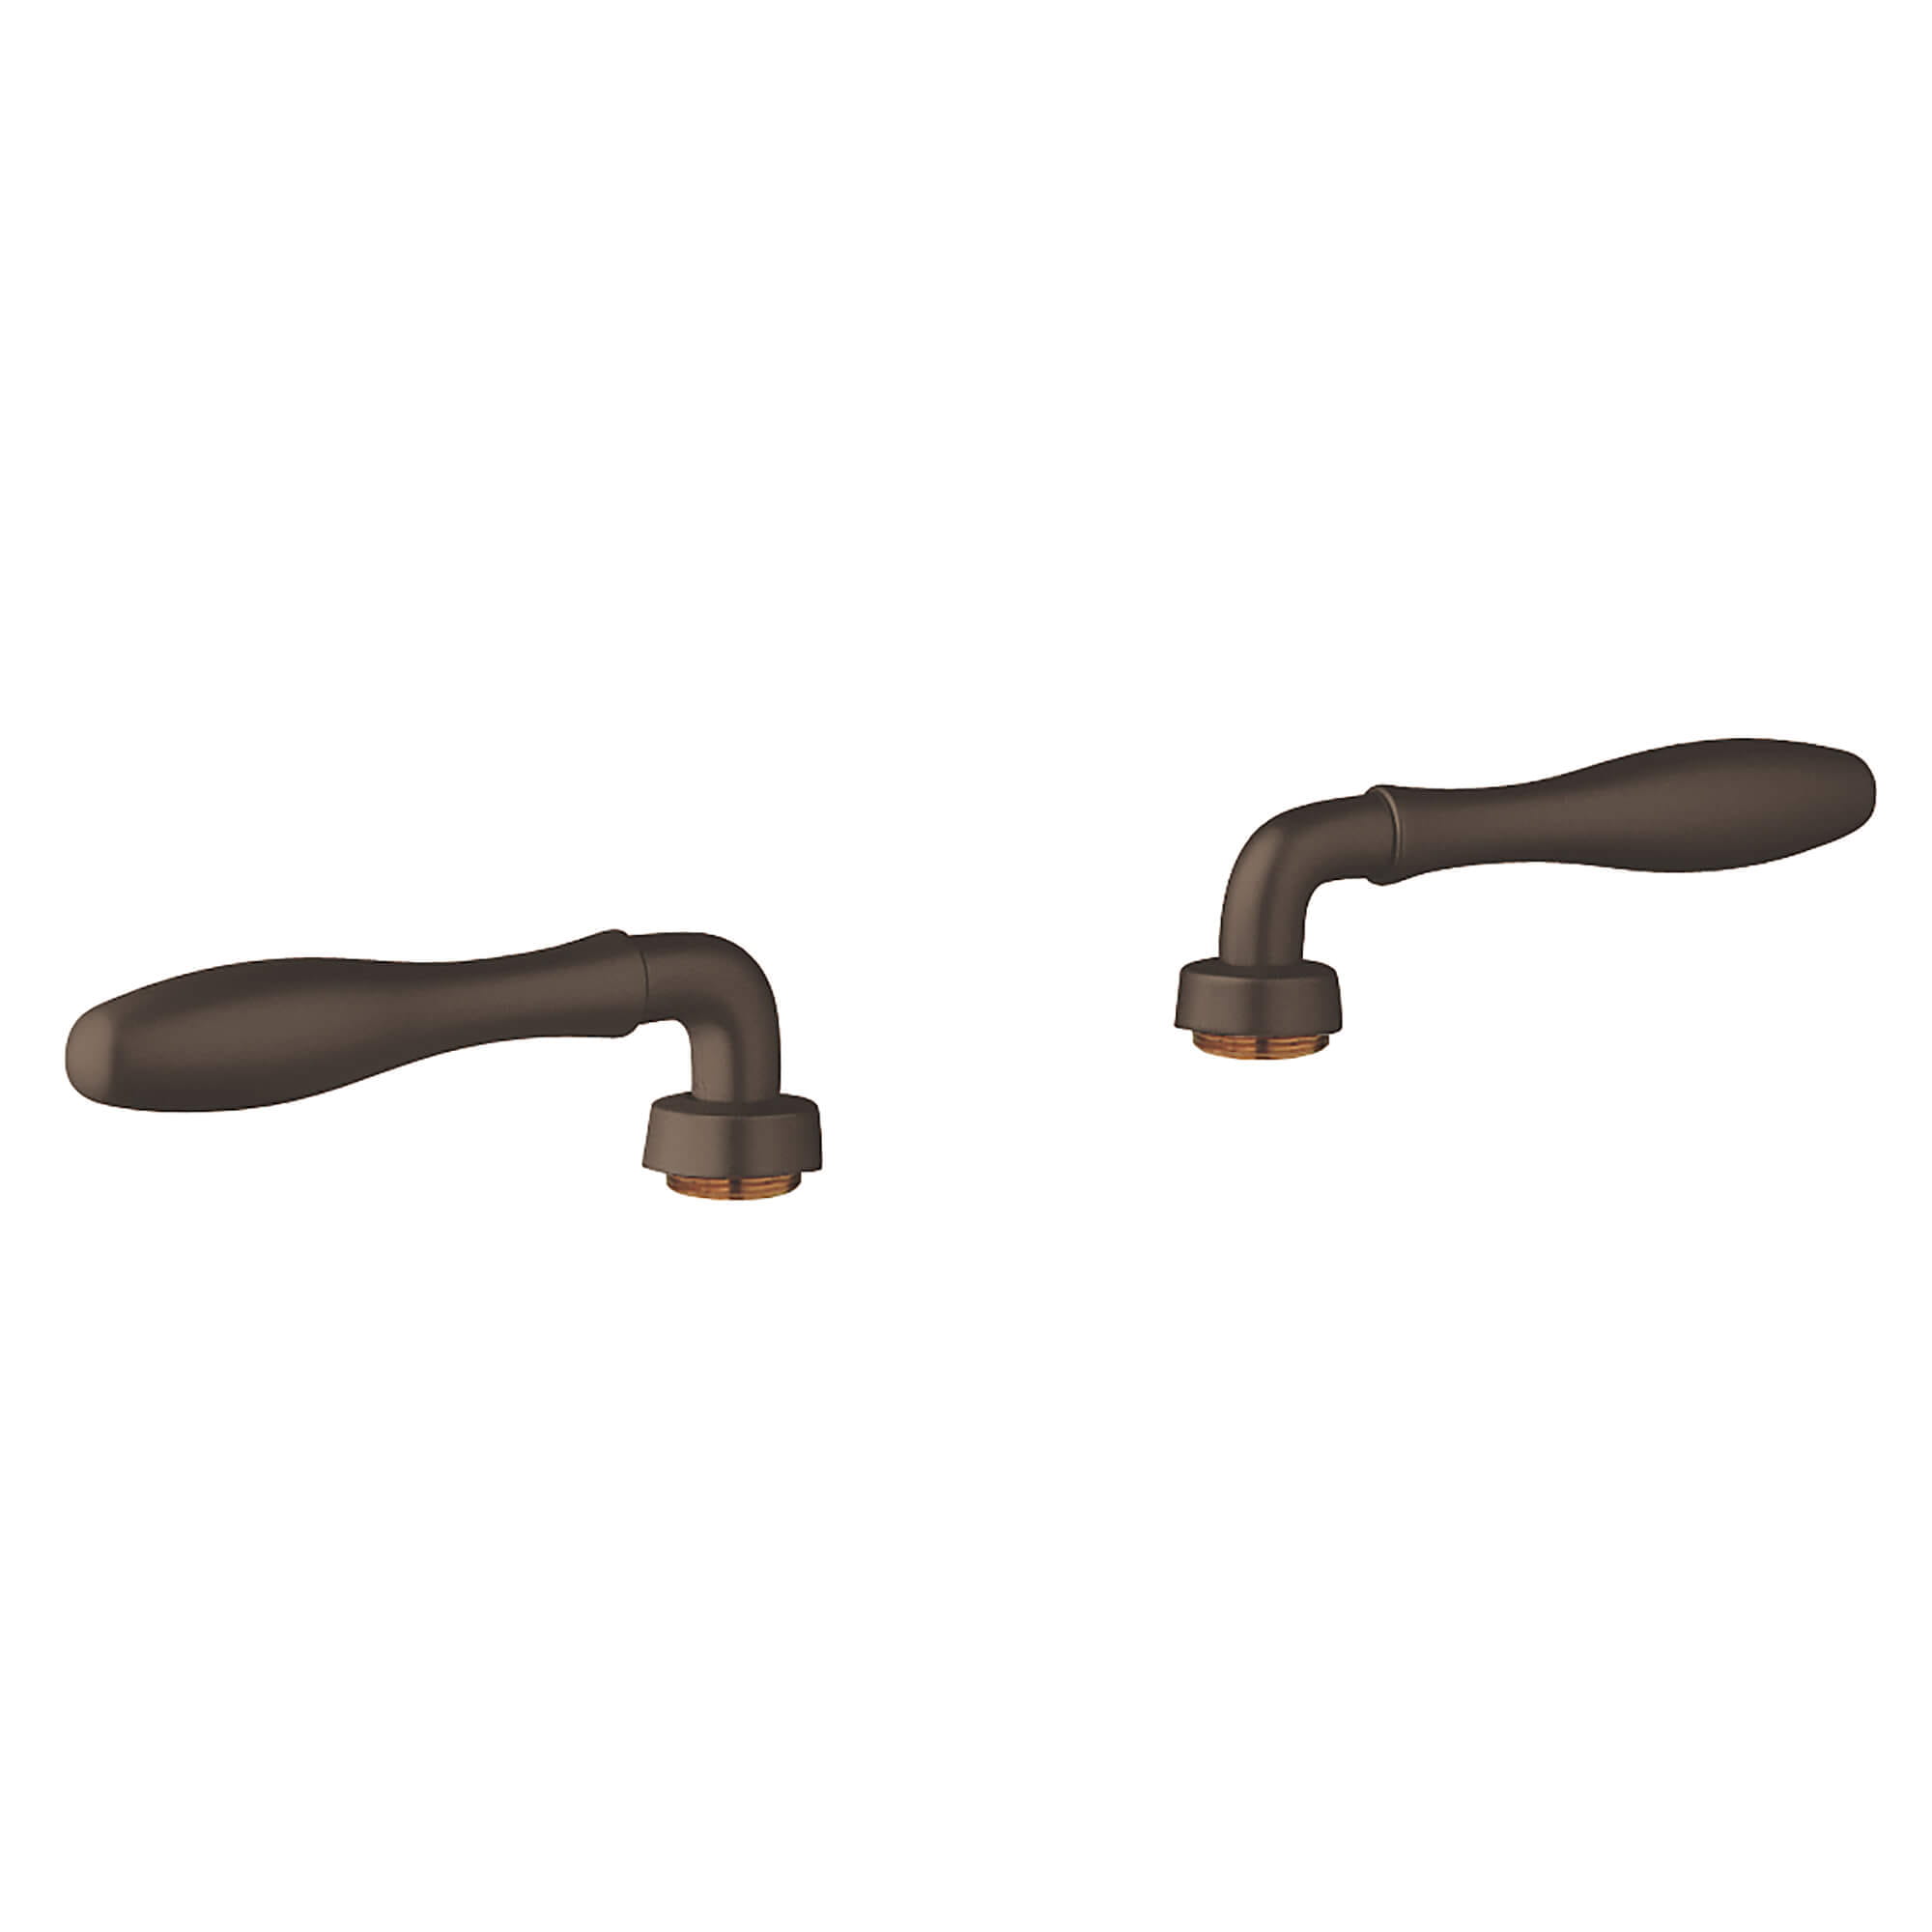 Lever Handles Pair GROHE OIL RUBBED BRONZE